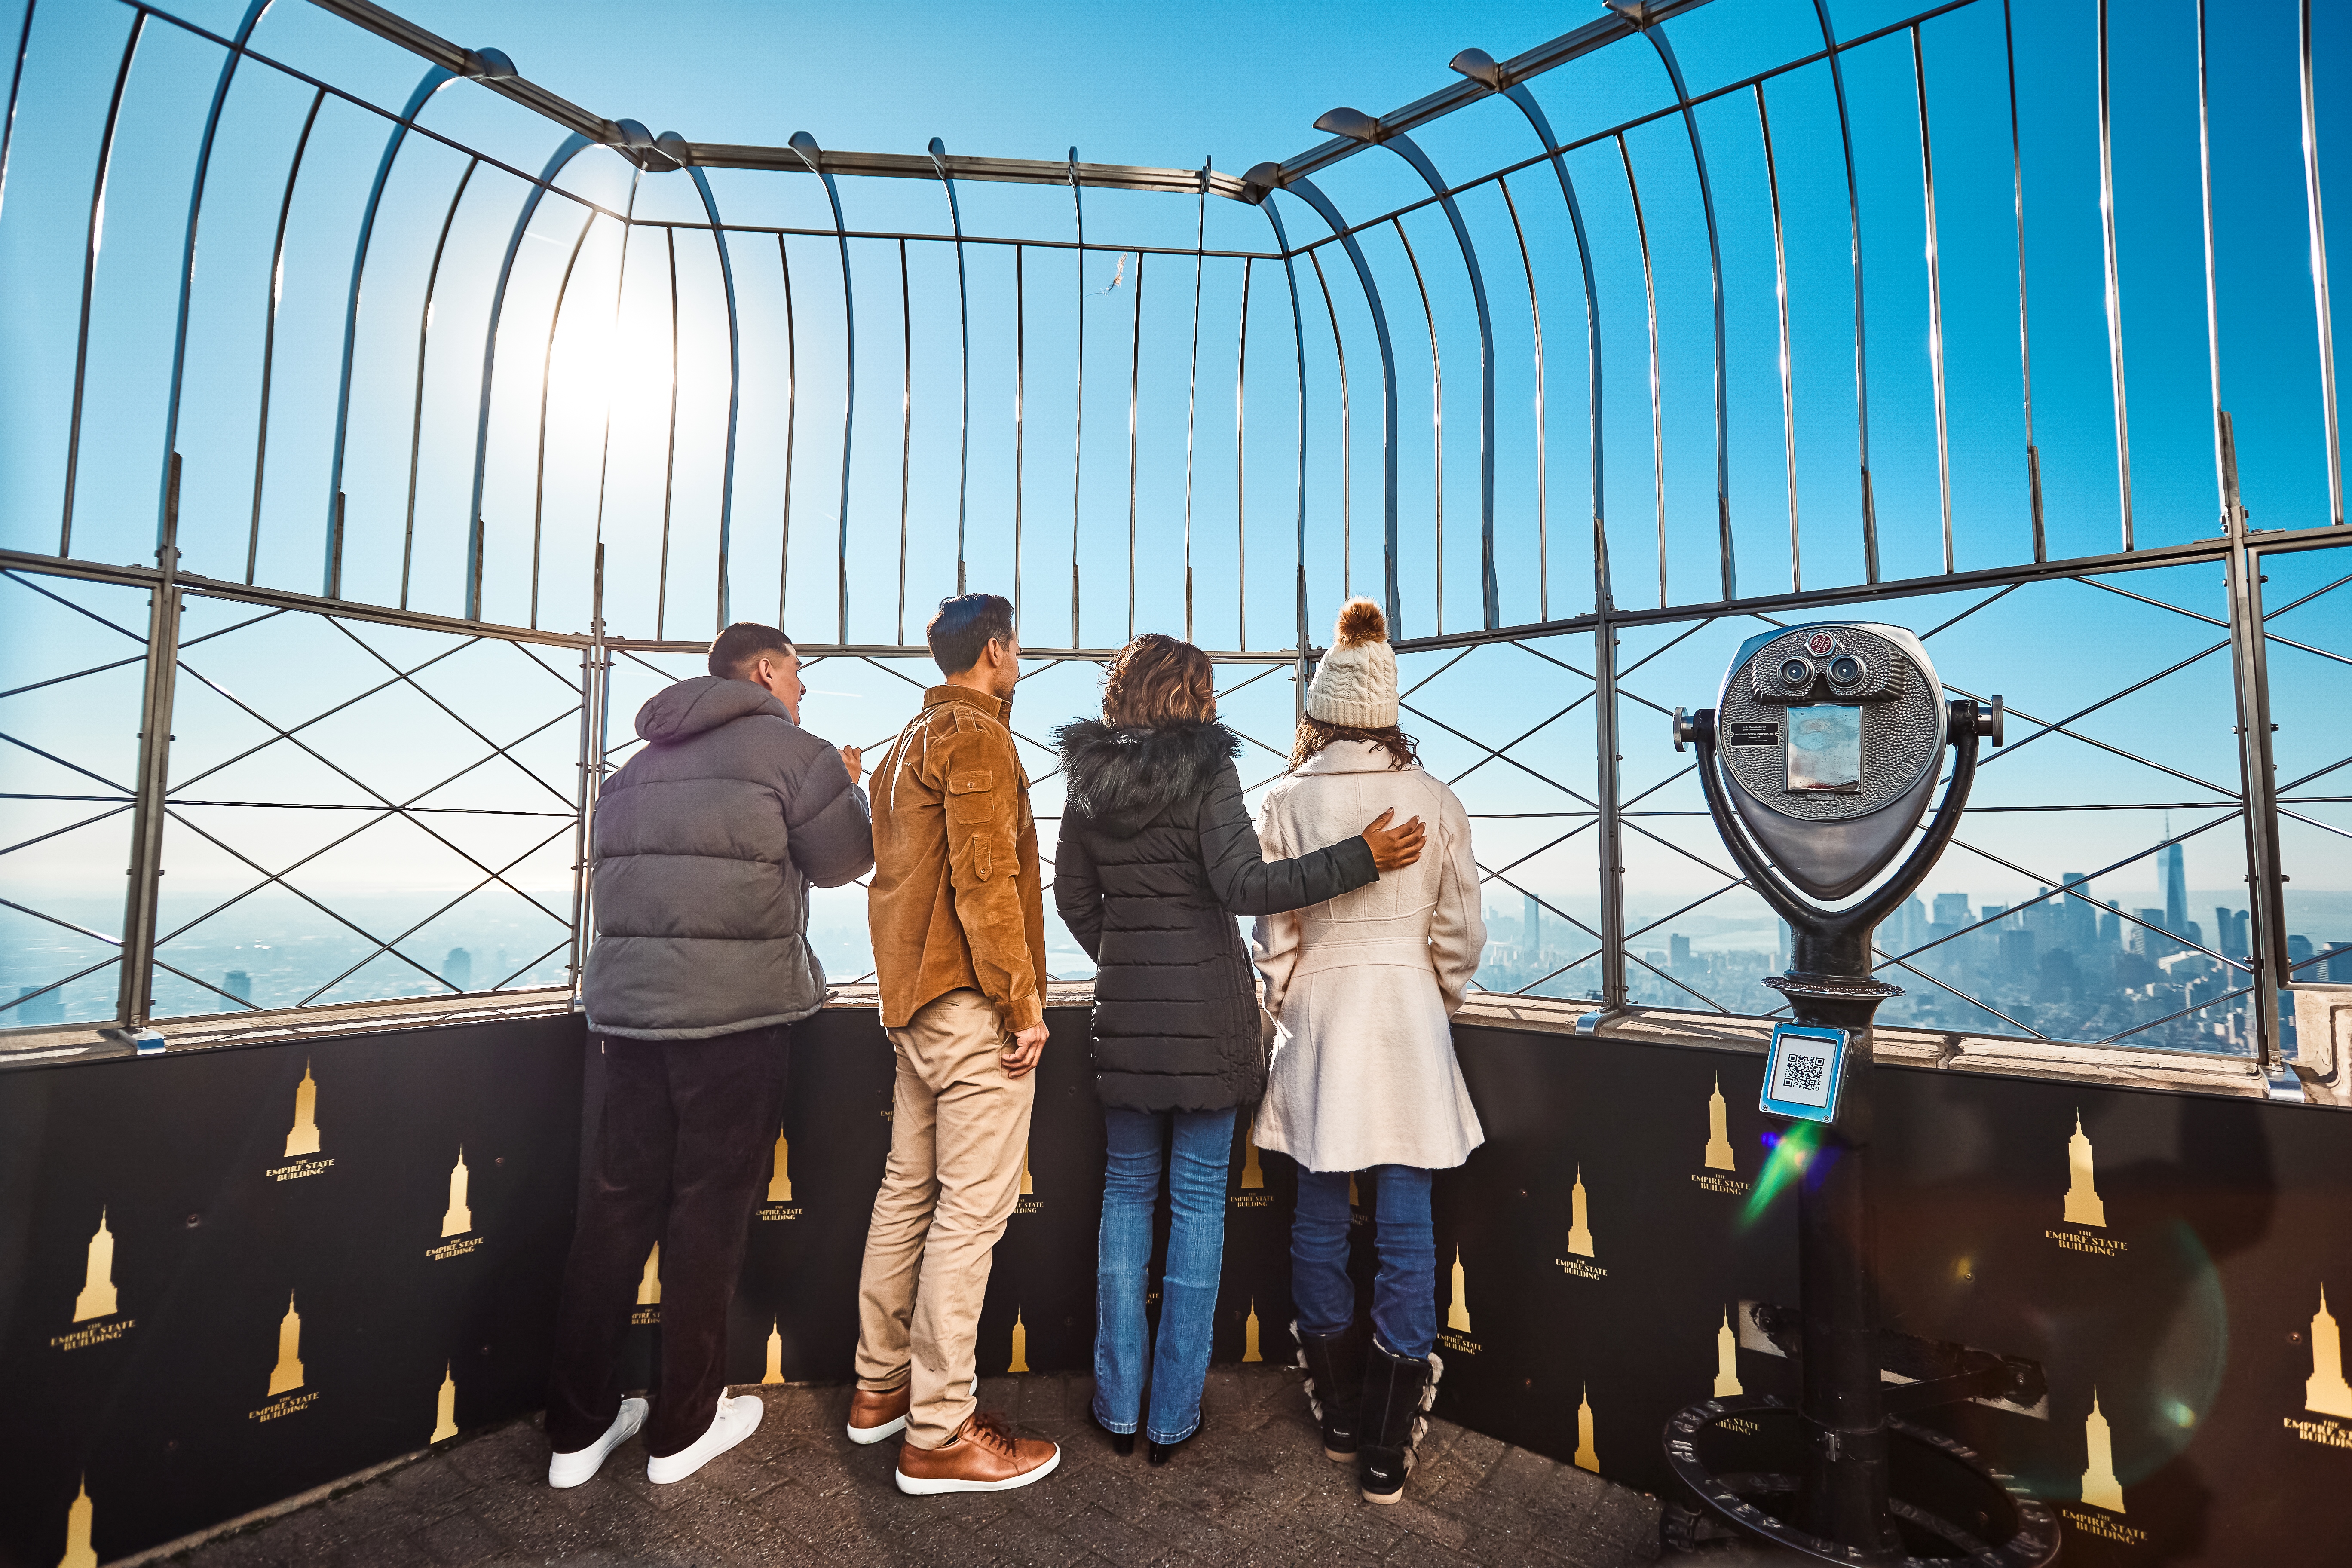 A family takes in the views at ESB